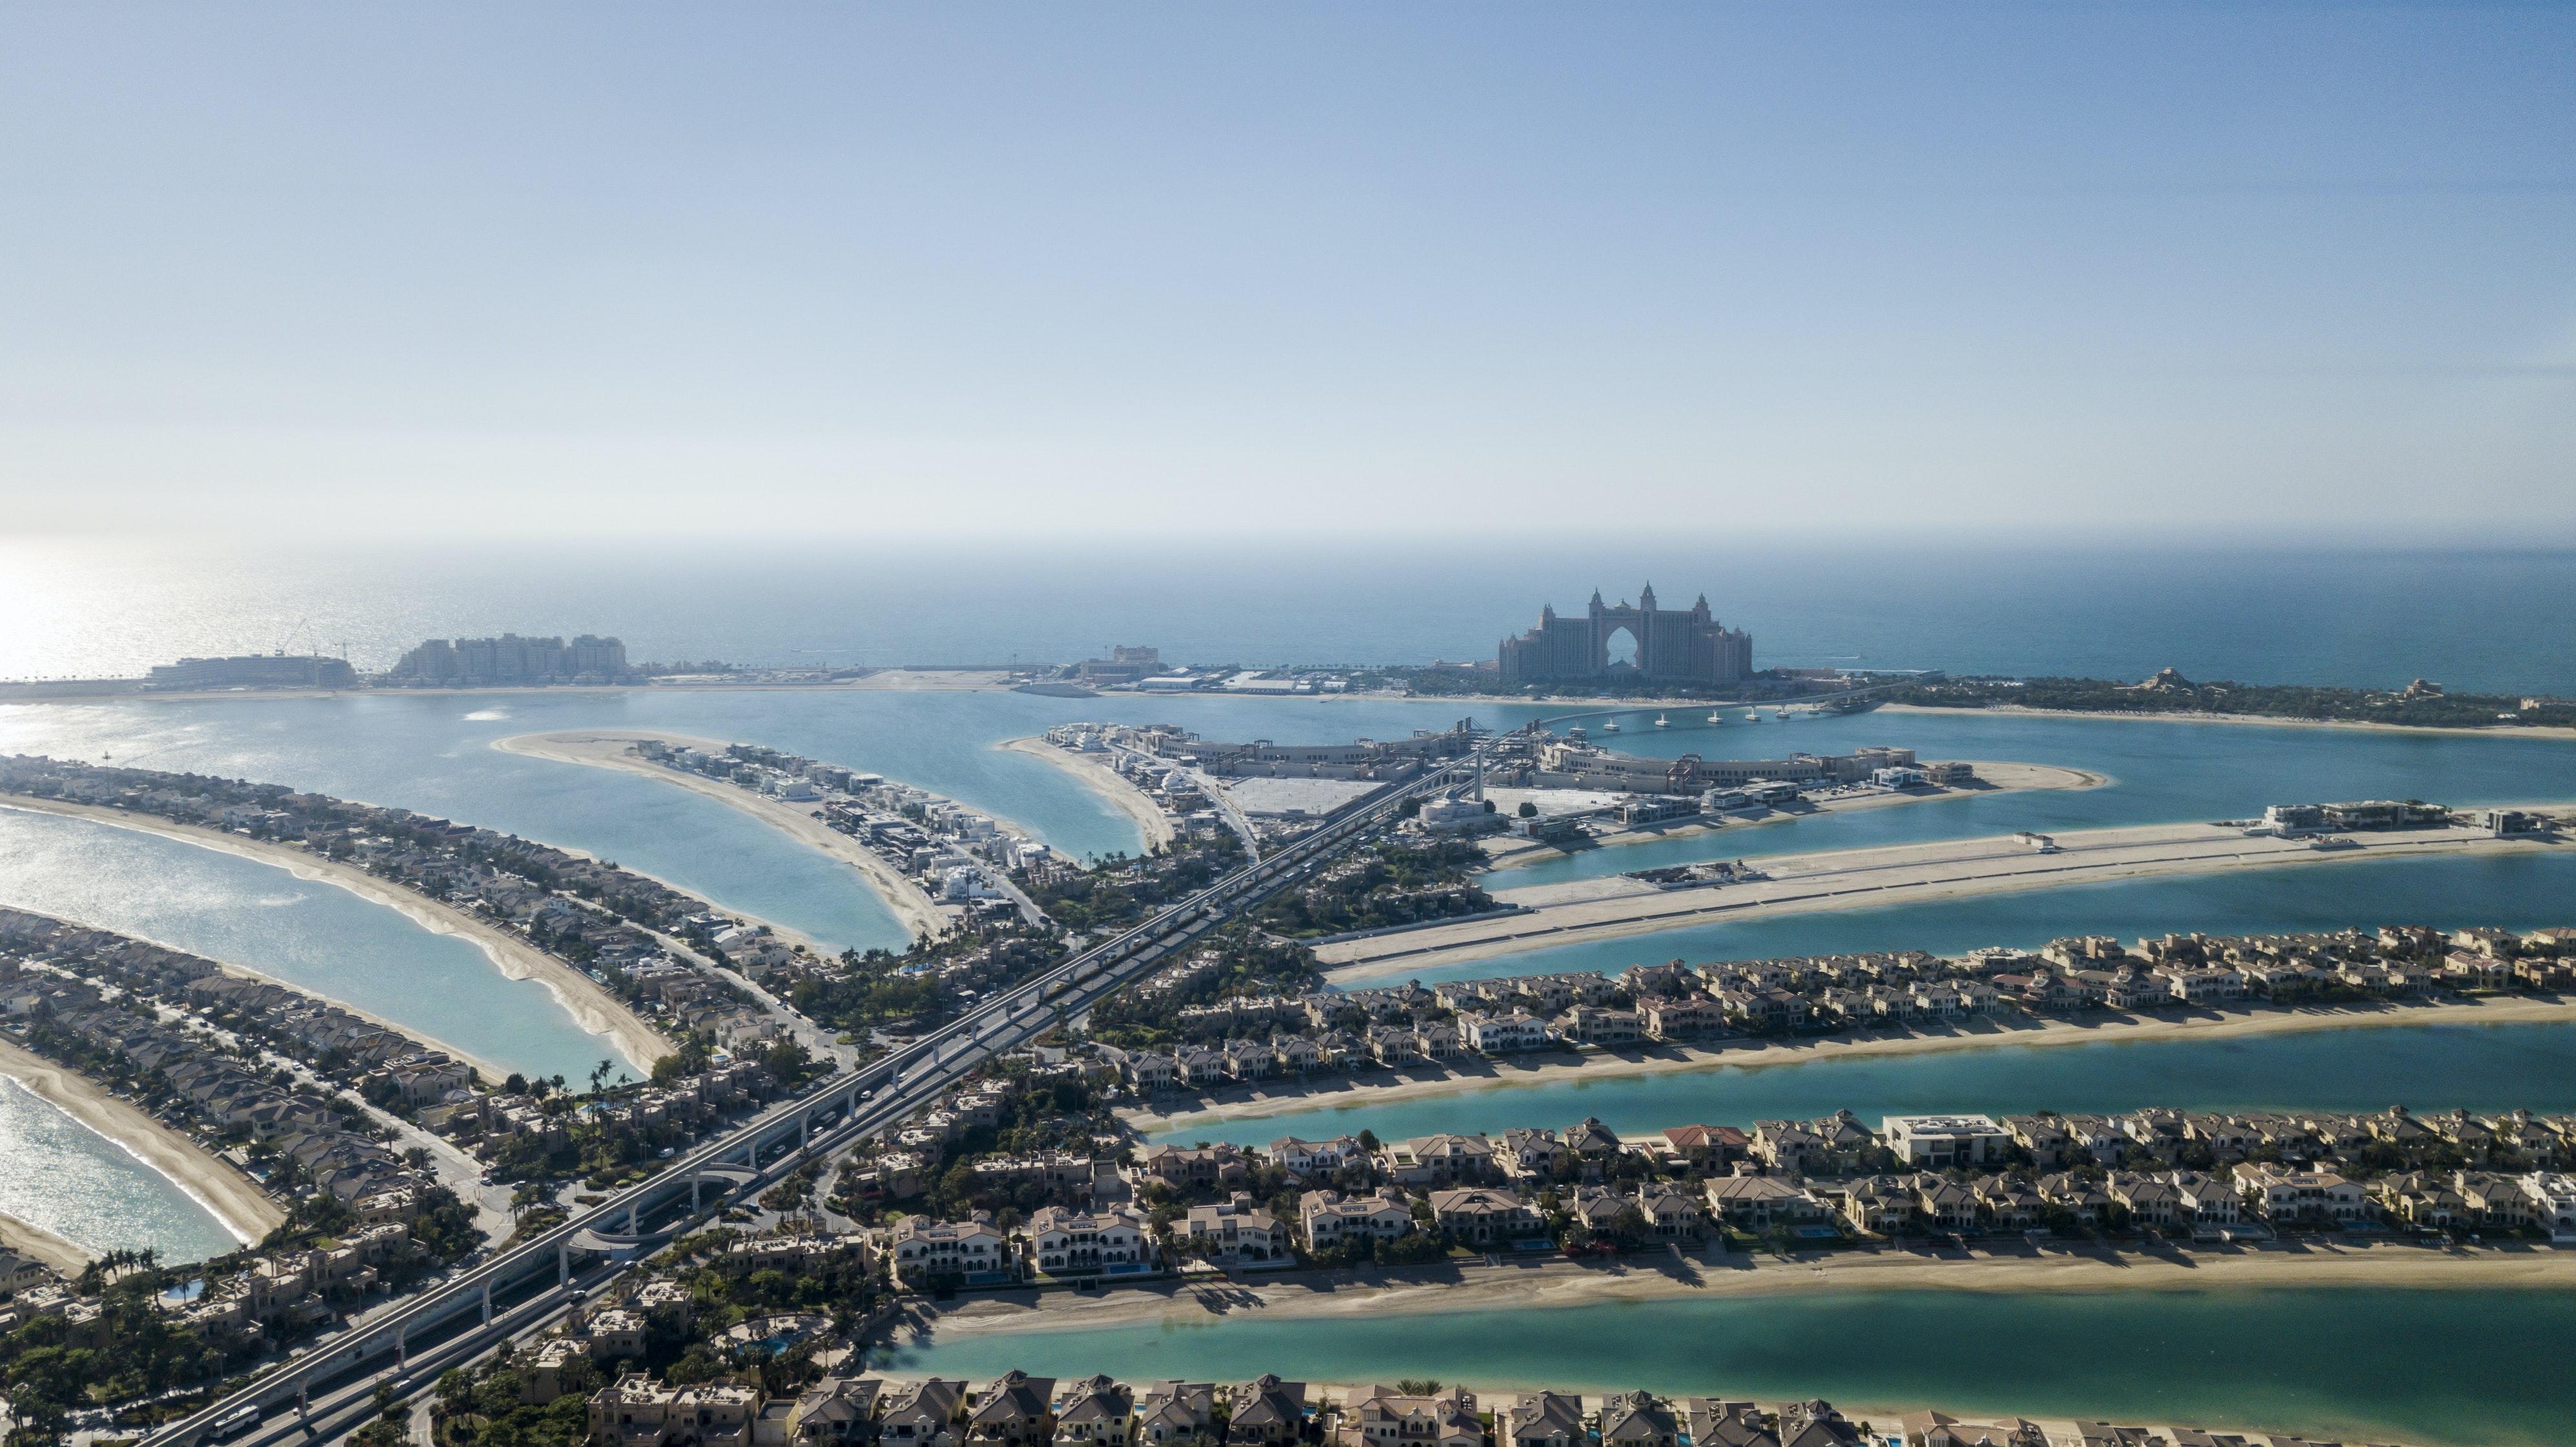 How much did it cost to build Palm Island Dubai? 